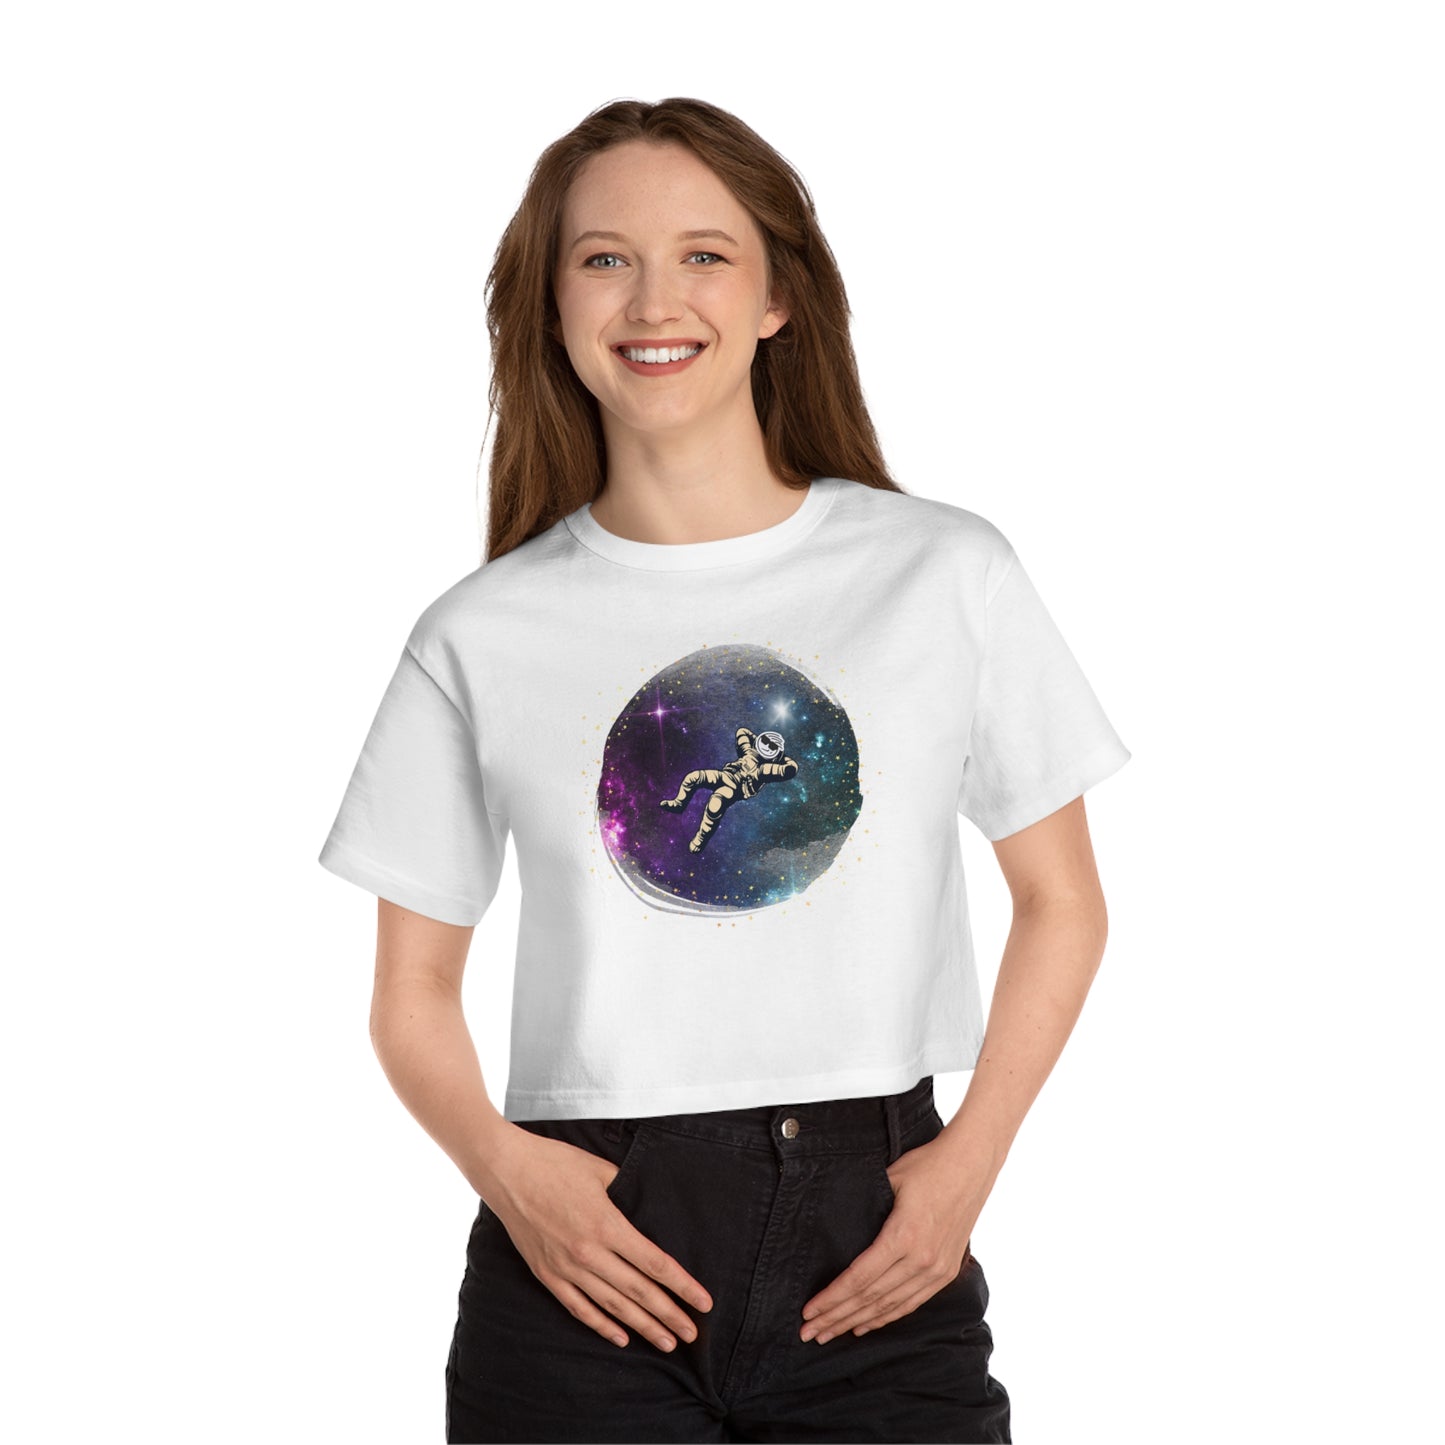 Stiky Astro Cropped T-Shirt